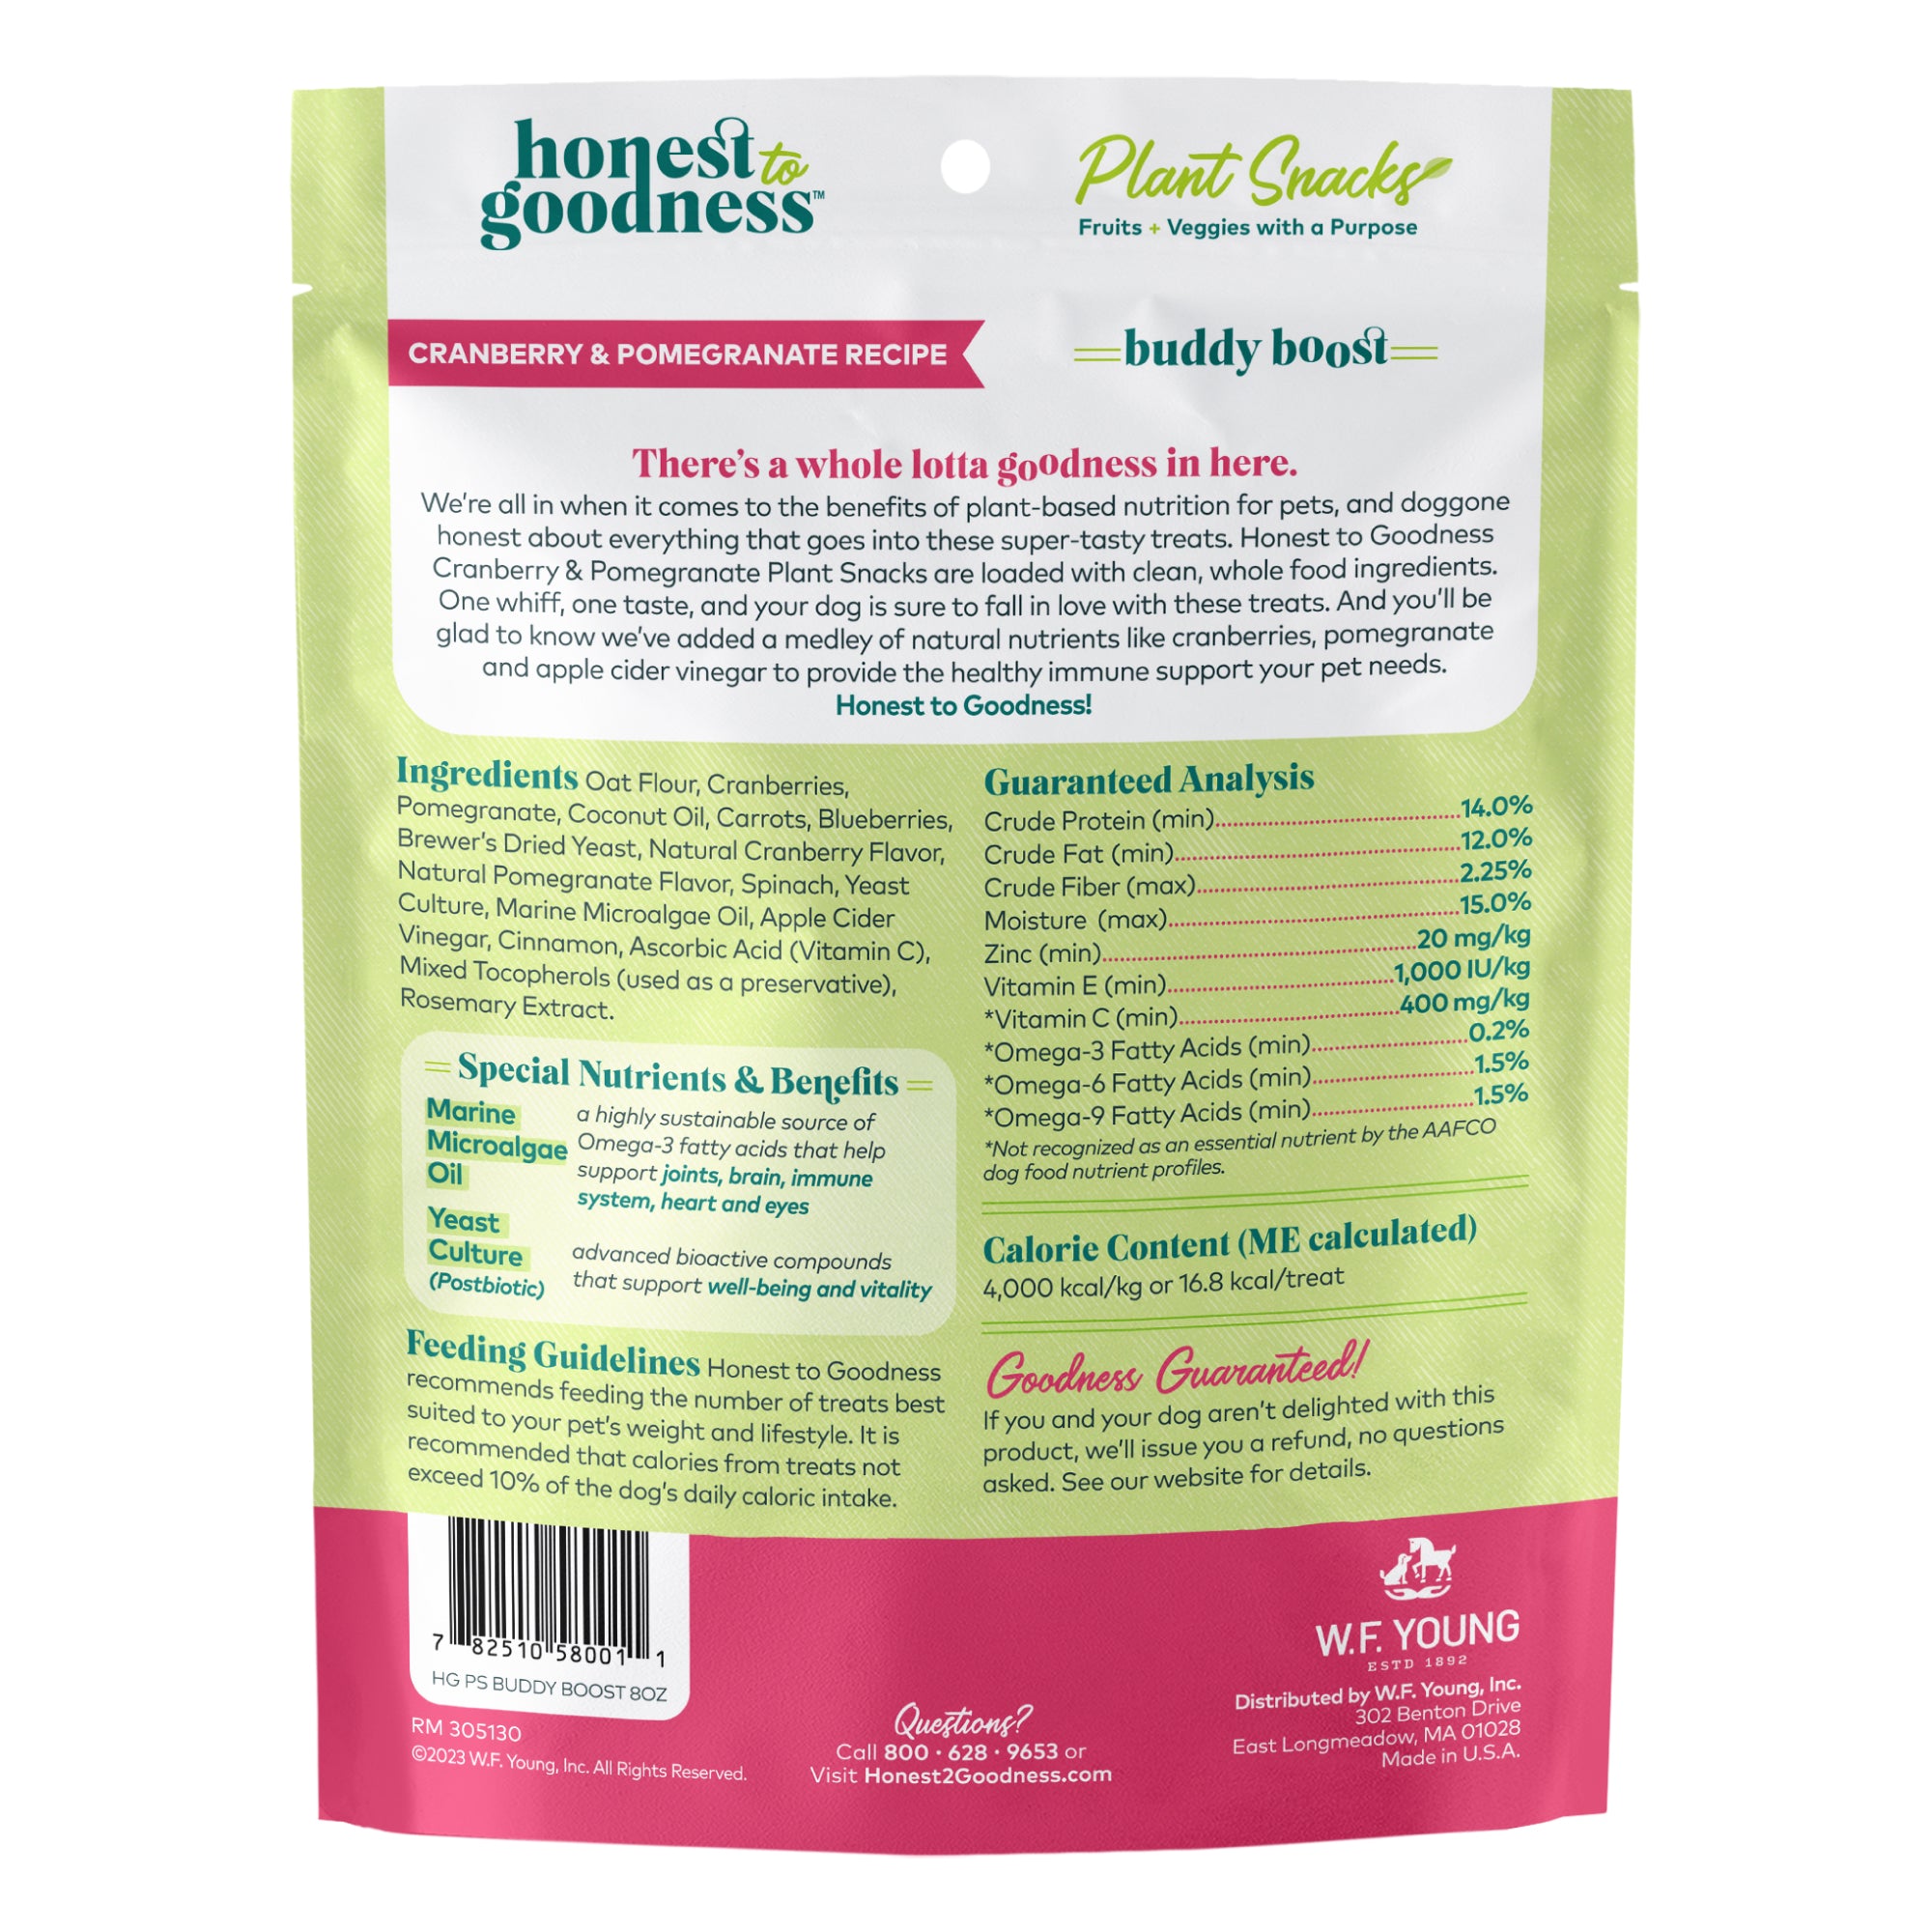 Honest to Goodness Plant Snacks fruits and veggies with a purpose.  Back of bag showing ingredients that go into Buddy Boost cranberry and pomegranate recipe.